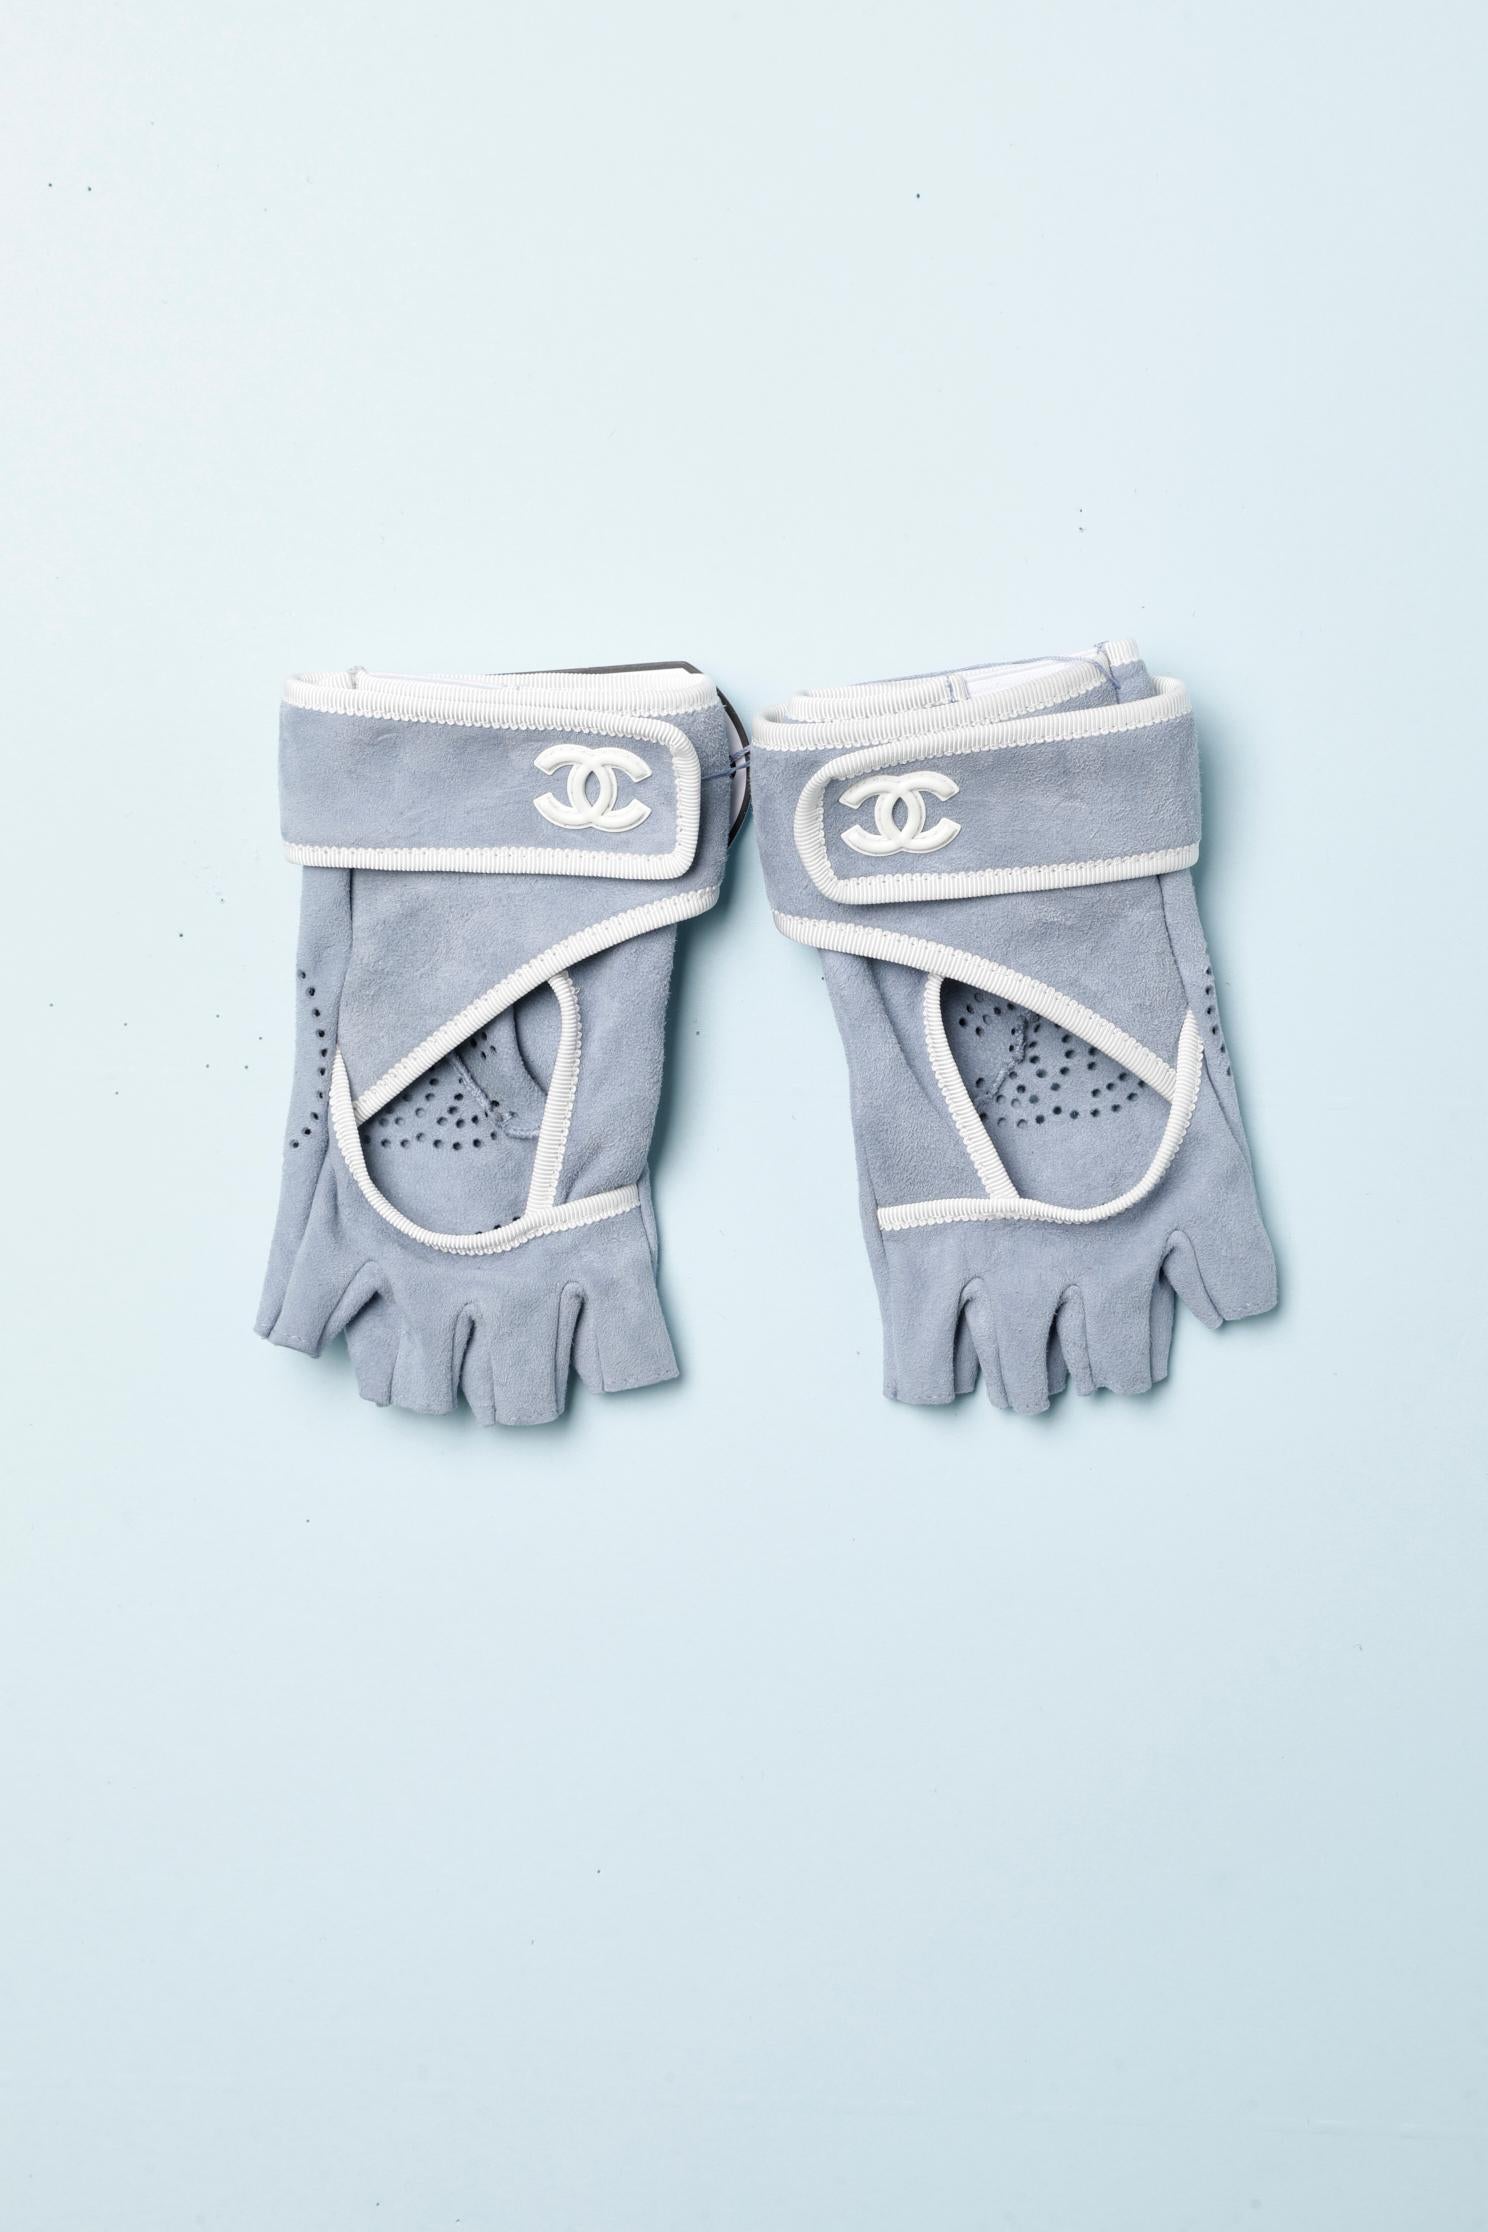 Pale blue suede mittens with white gros-grain piping and white 